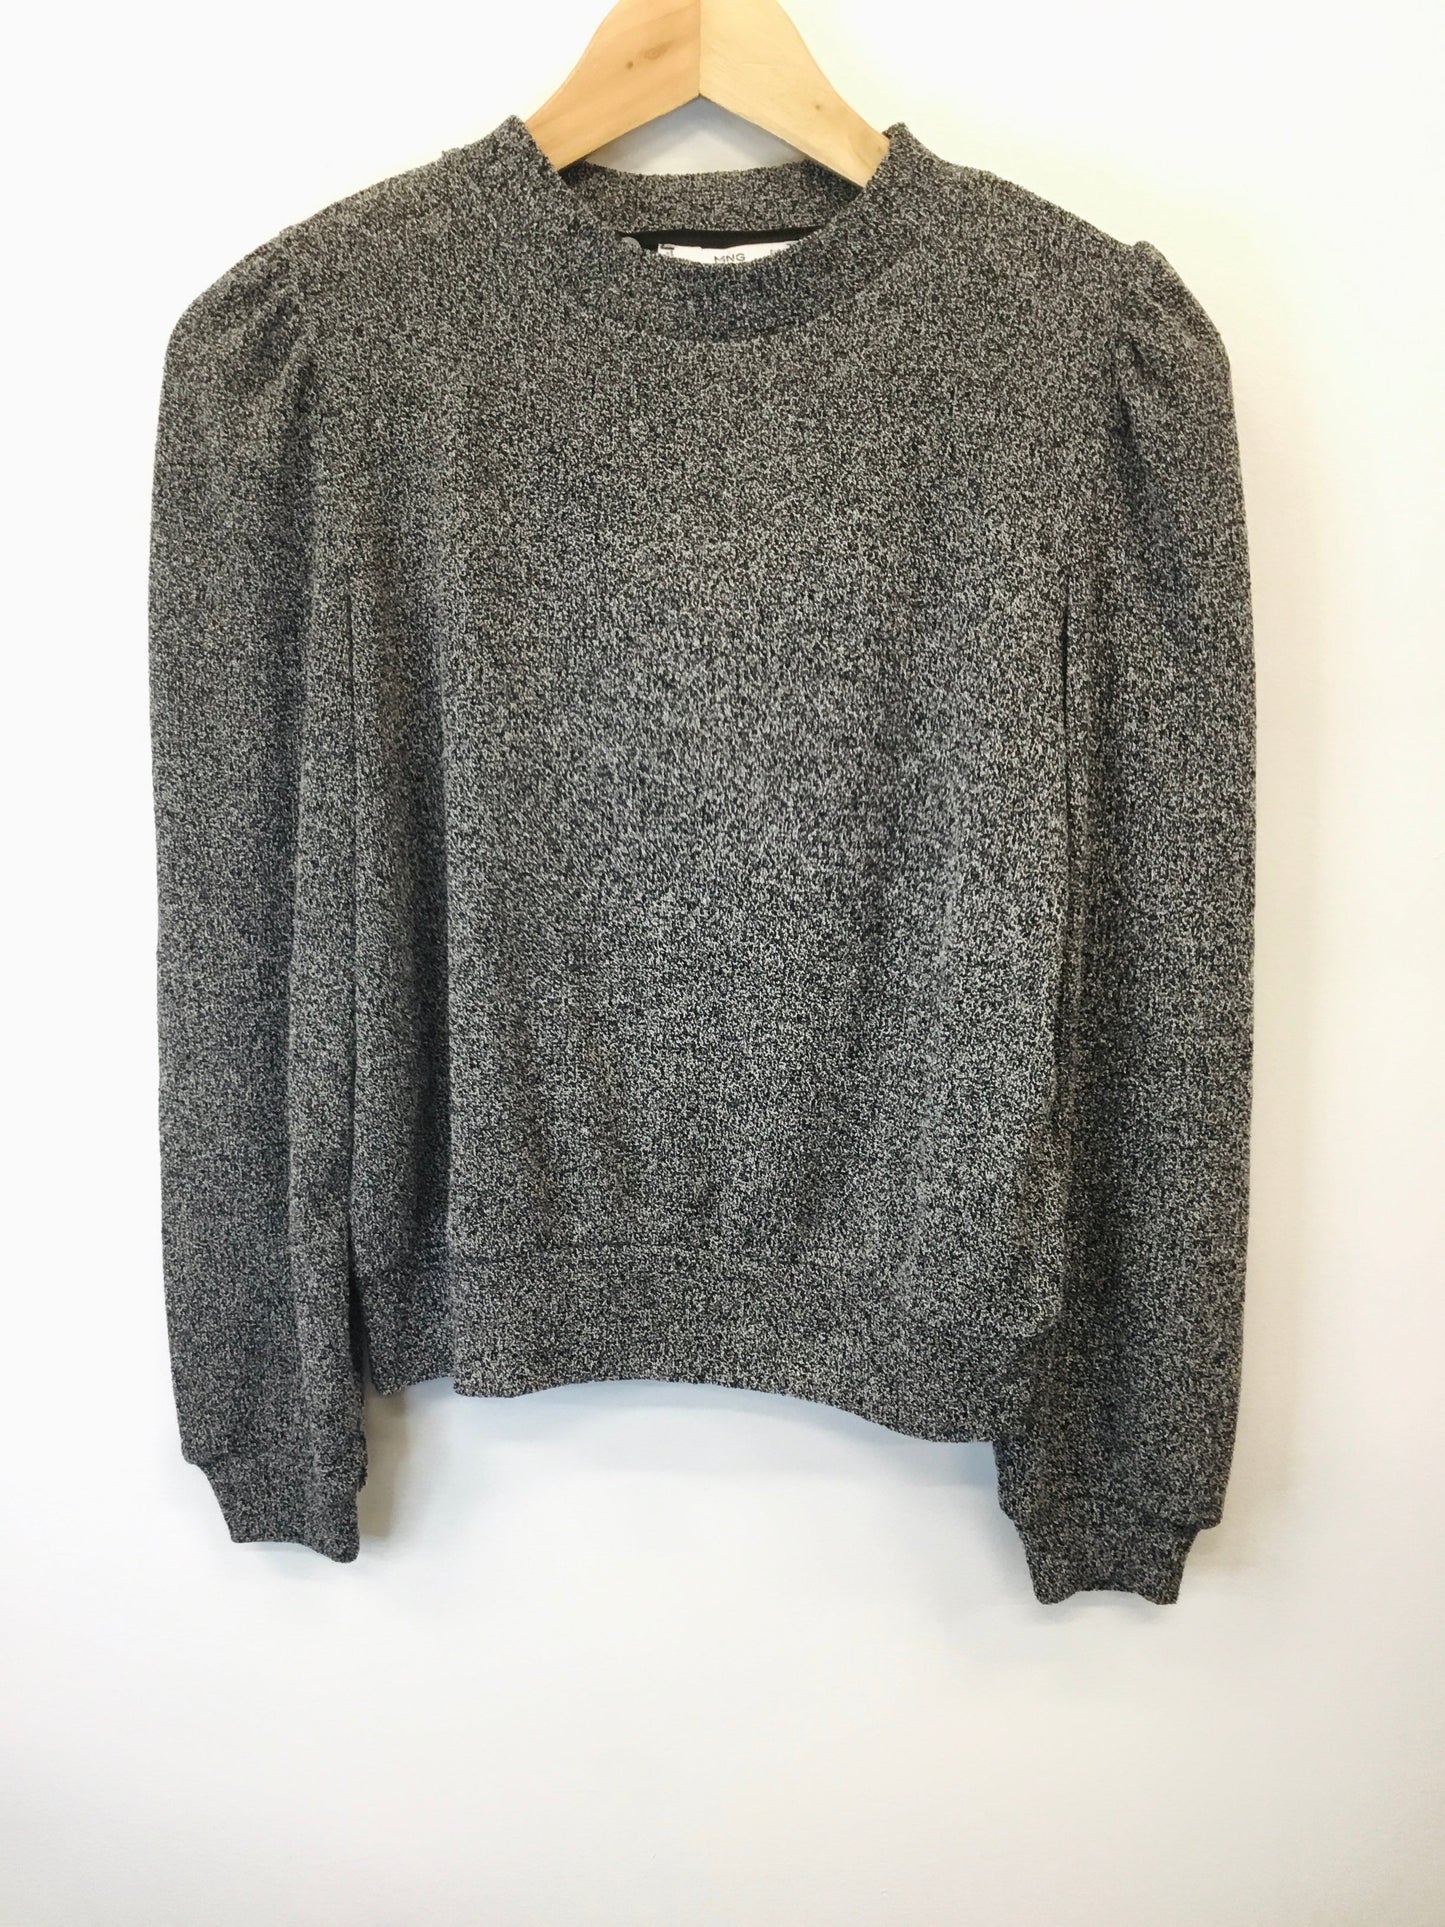 Top Long Sleeve By Mango  Size: Xs